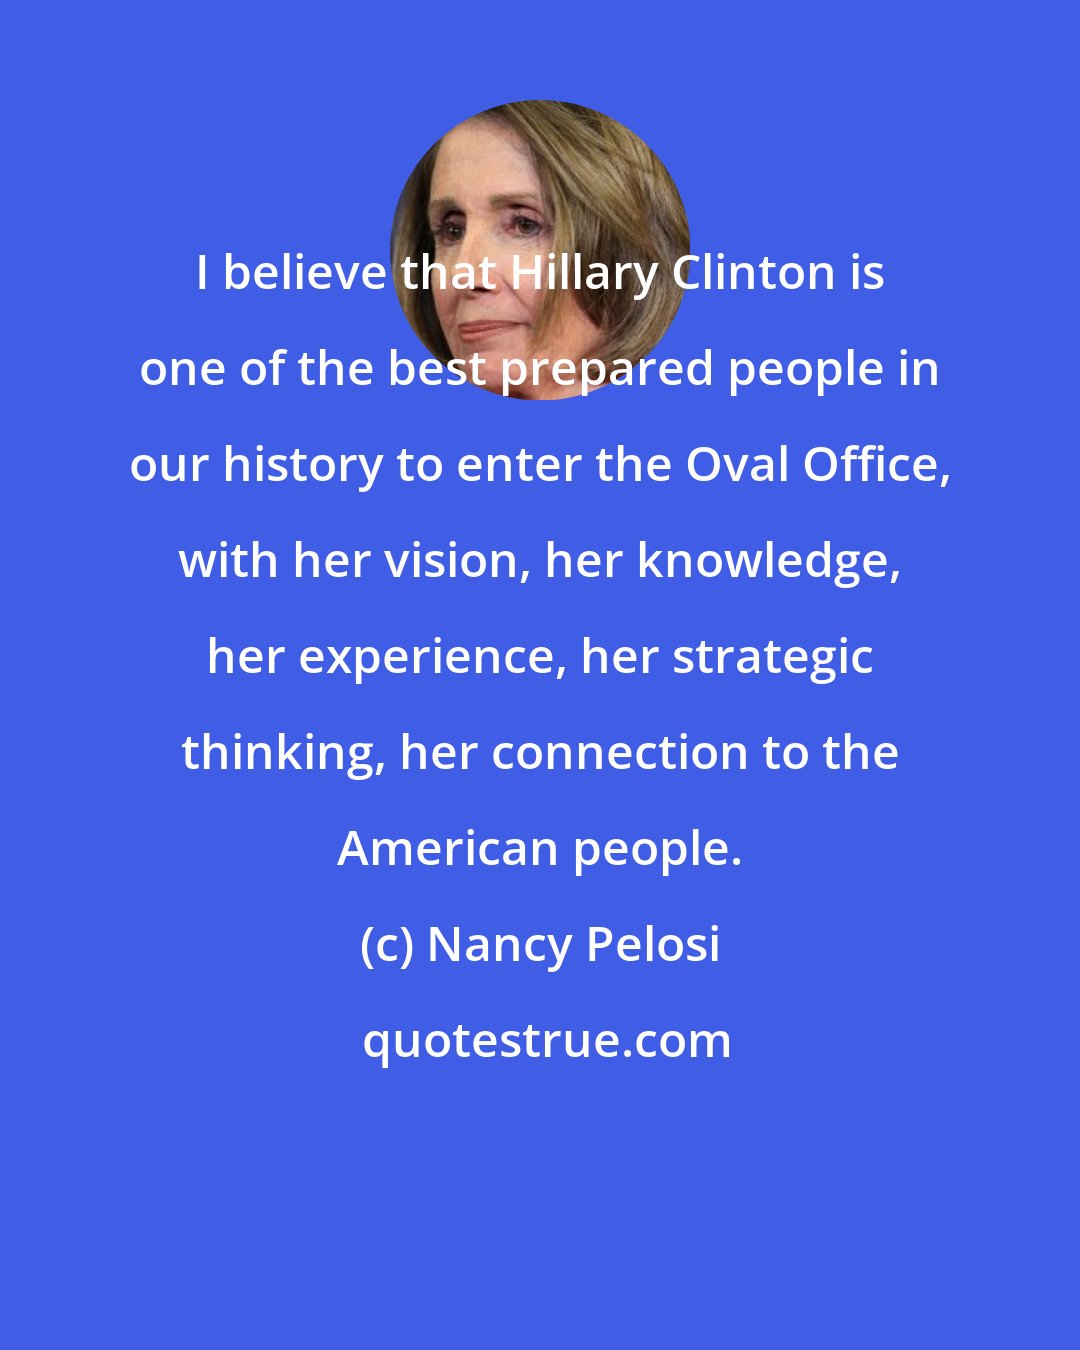 Nancy Pelosi: I believe that Hillary Clinton is one of the best prepared people in our history to enter the Oval Office, with her vision, her knowledge, her experience, her strategic thinking, her connection to the American people.